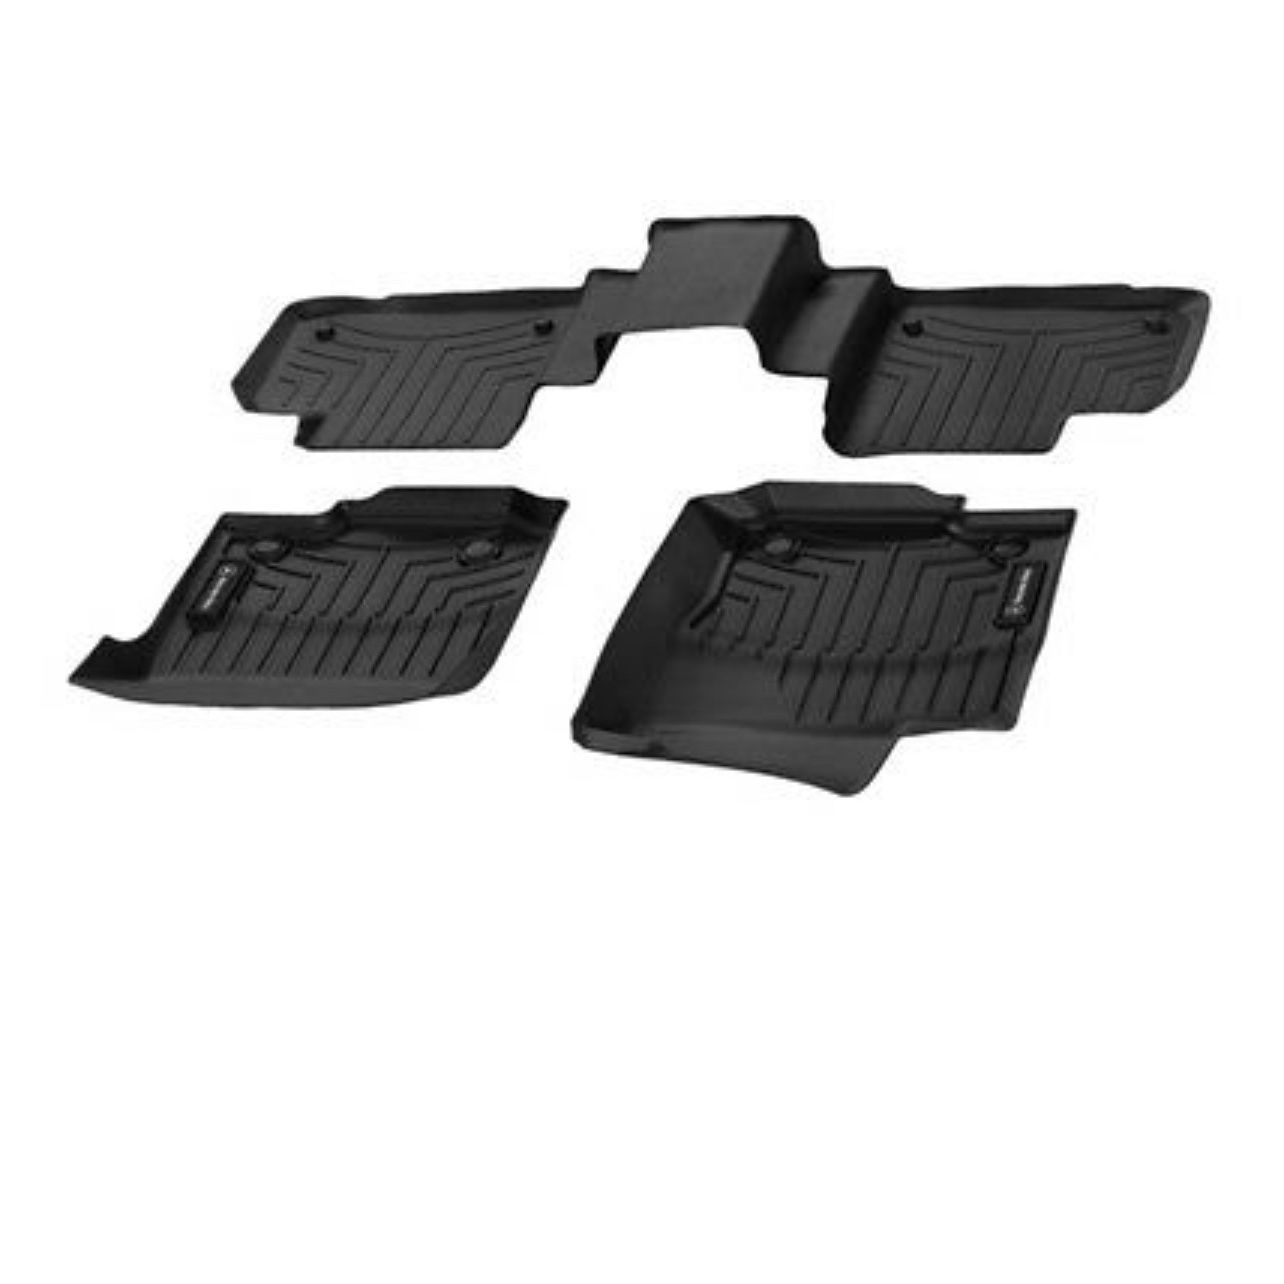 Mercedes OEM All Weather Floor Liners Trays Mats 2017 to 2019 GLS-Class